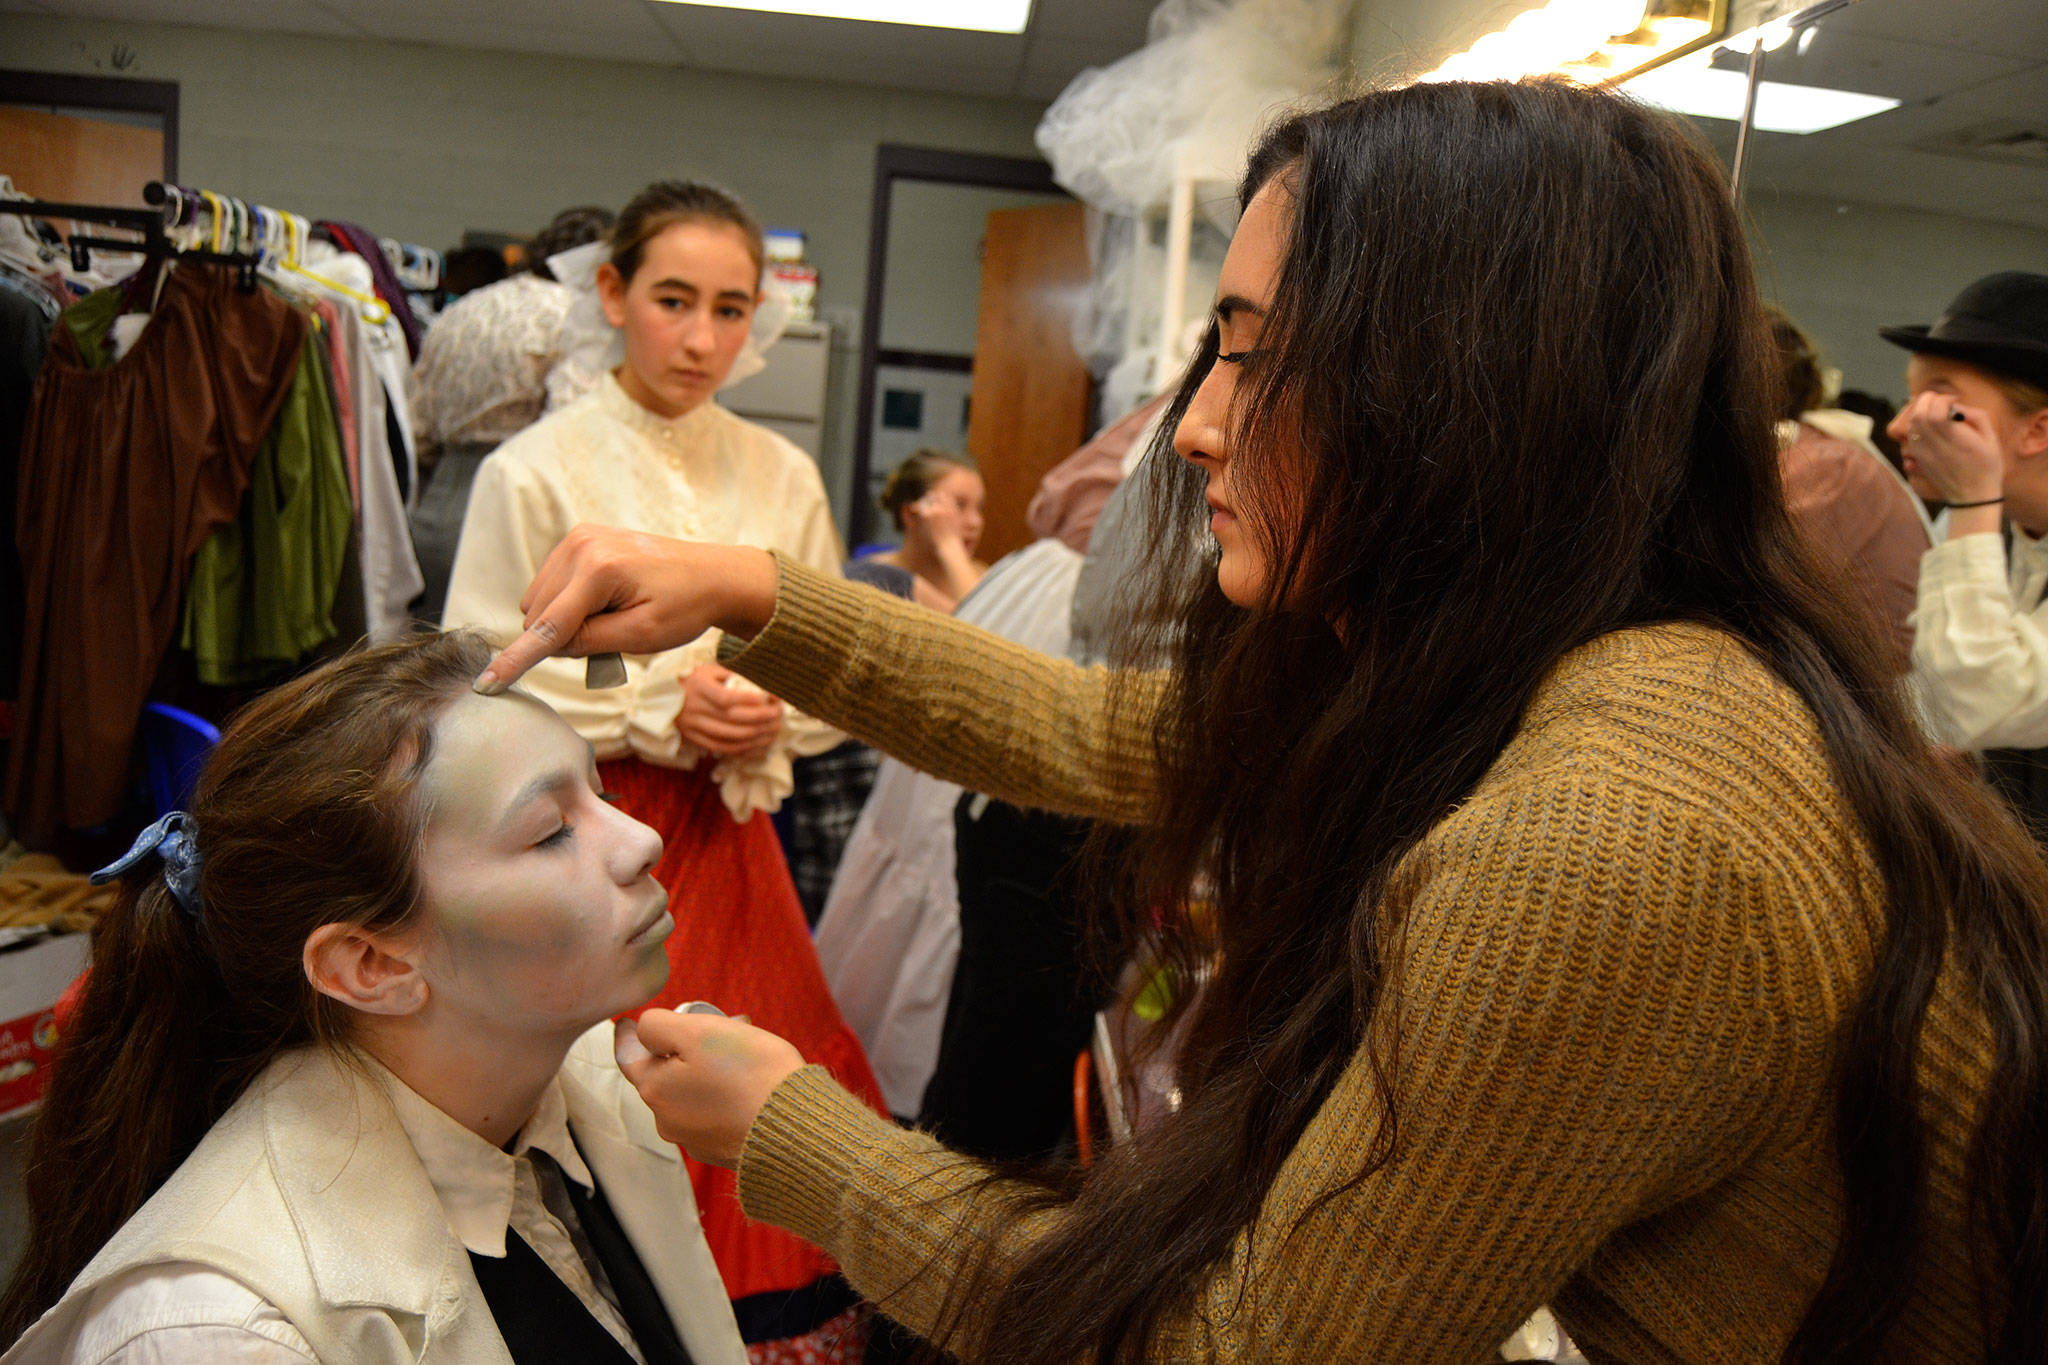 Corrine Klinger, makeup chair, readies Maggie van Dyken’s makeup for her role as Jacob Marley as Kariya Johnson watches. Students say they’re excited to reveal the looks for the all of the ghosts in “A Christmas Carol.” Sequim Gazette photo by Matthew Nash